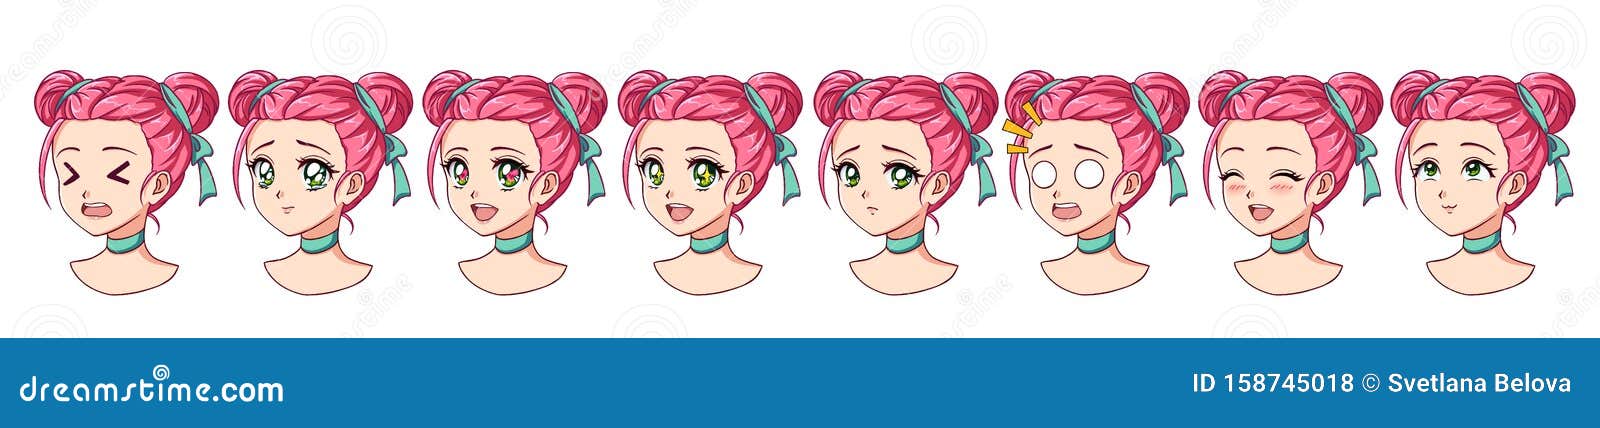 A Set of Cute Anime Girl with Different Expressions. Pink Hair, Big Green  Eyes Stock Vector - Illustration of badge, facial: 158745018